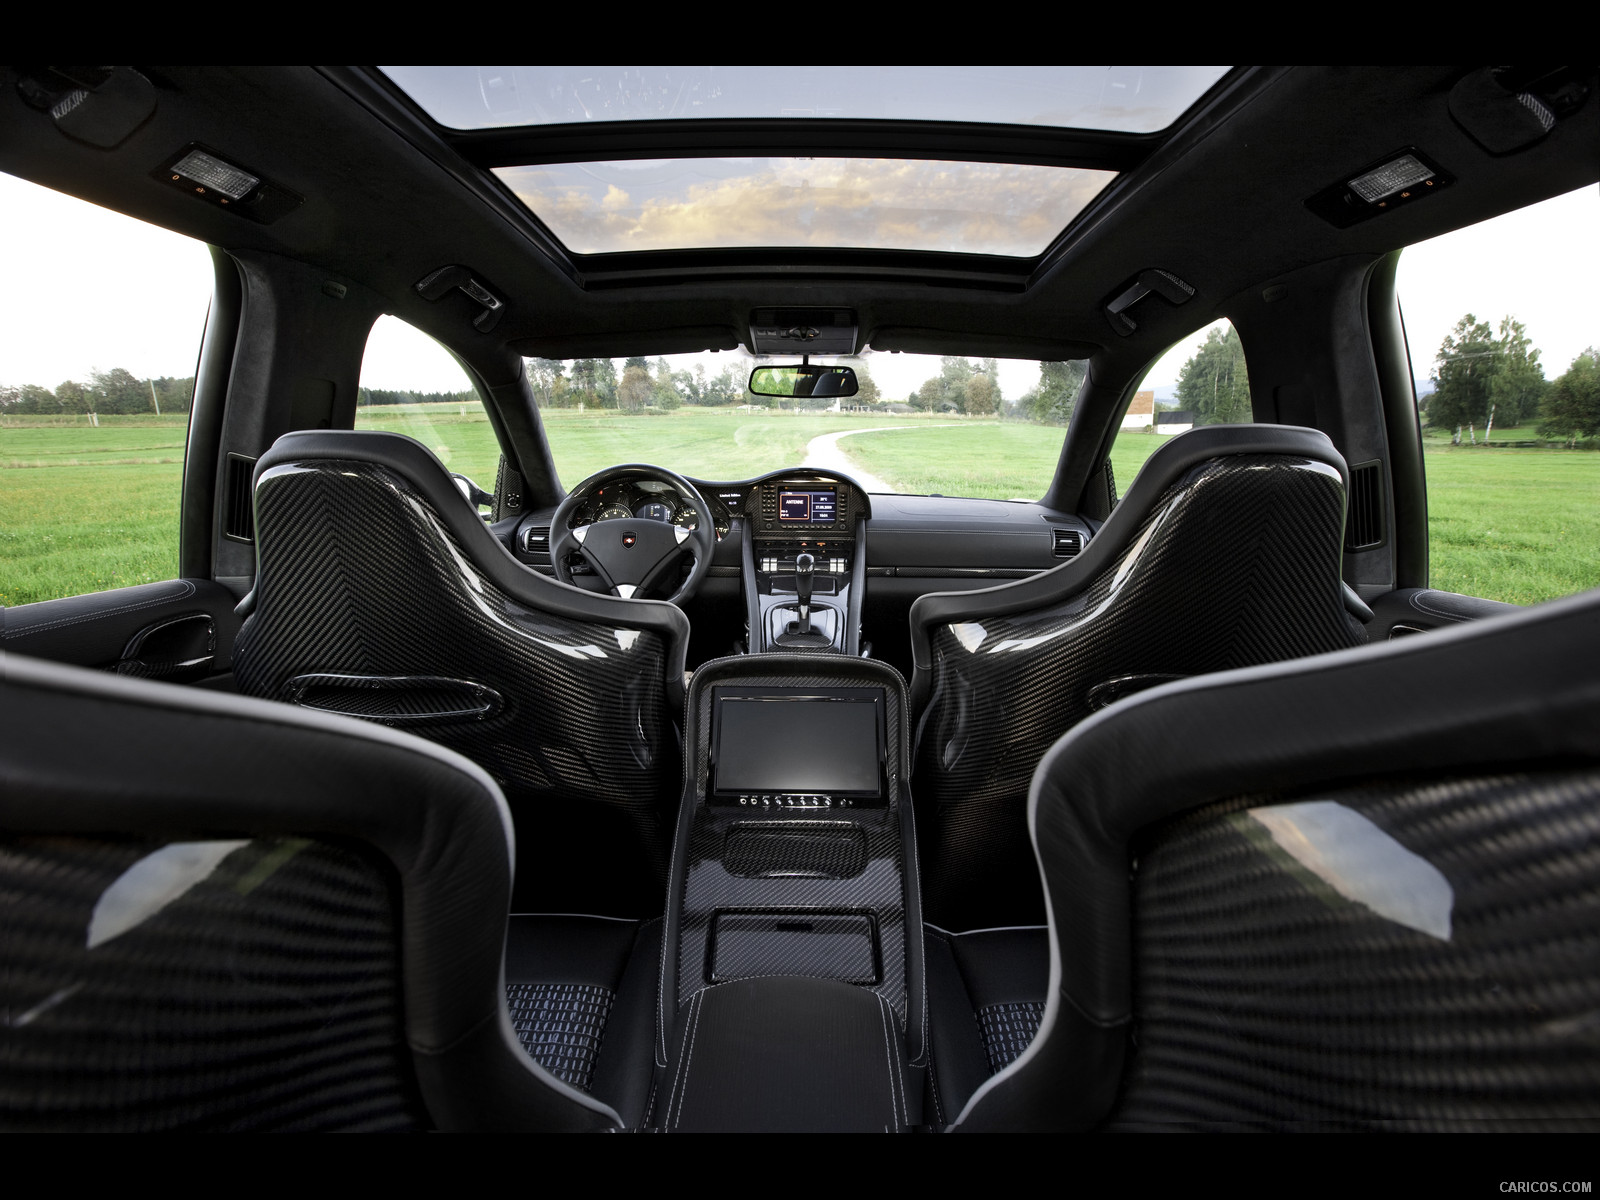 2009 Mansory Chopster based on Porsche Cayenne Turbo S  - Interior, #34 of 38